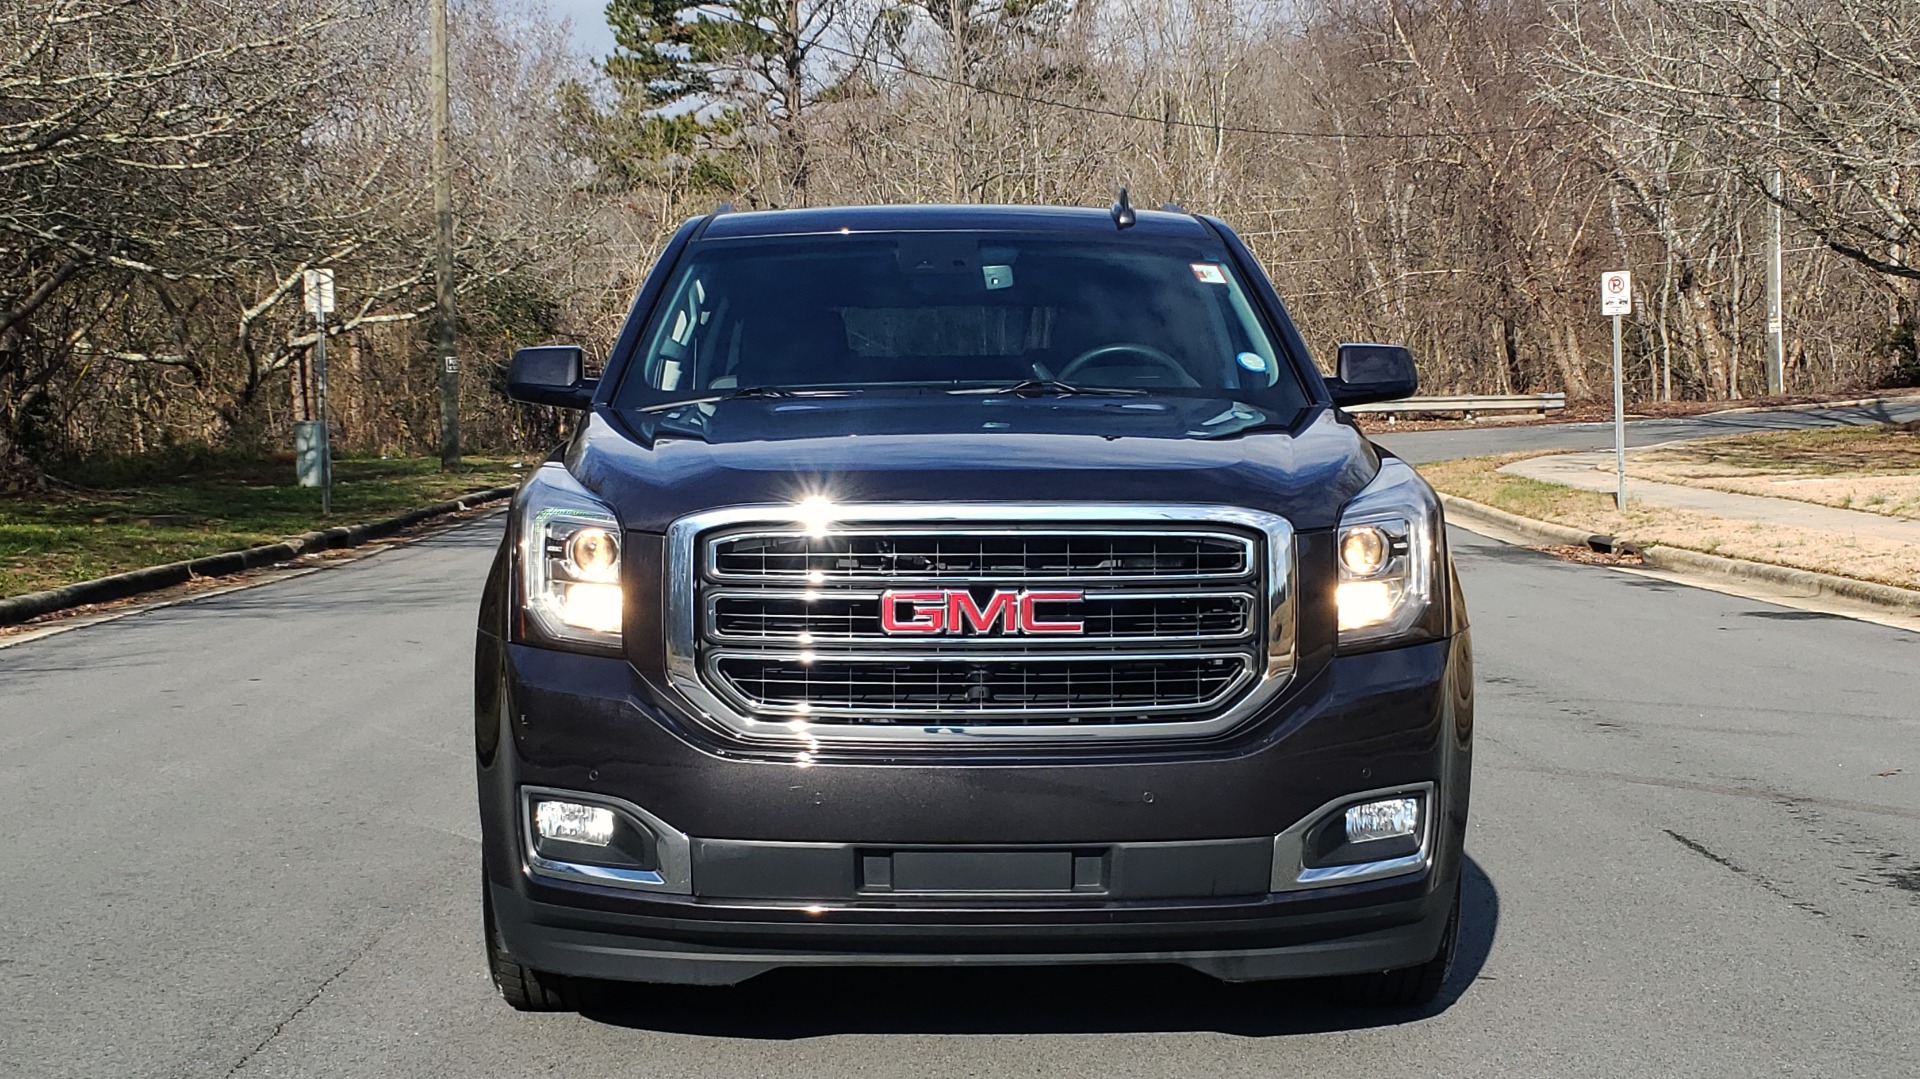 Used 2017 GMC YUKON XL SLT 4X4 / NAV / SUNROOF / BOSE / 3-ROW / REARVIEW for sale Sold at Formula Imports in Charlotte NC 28227 23